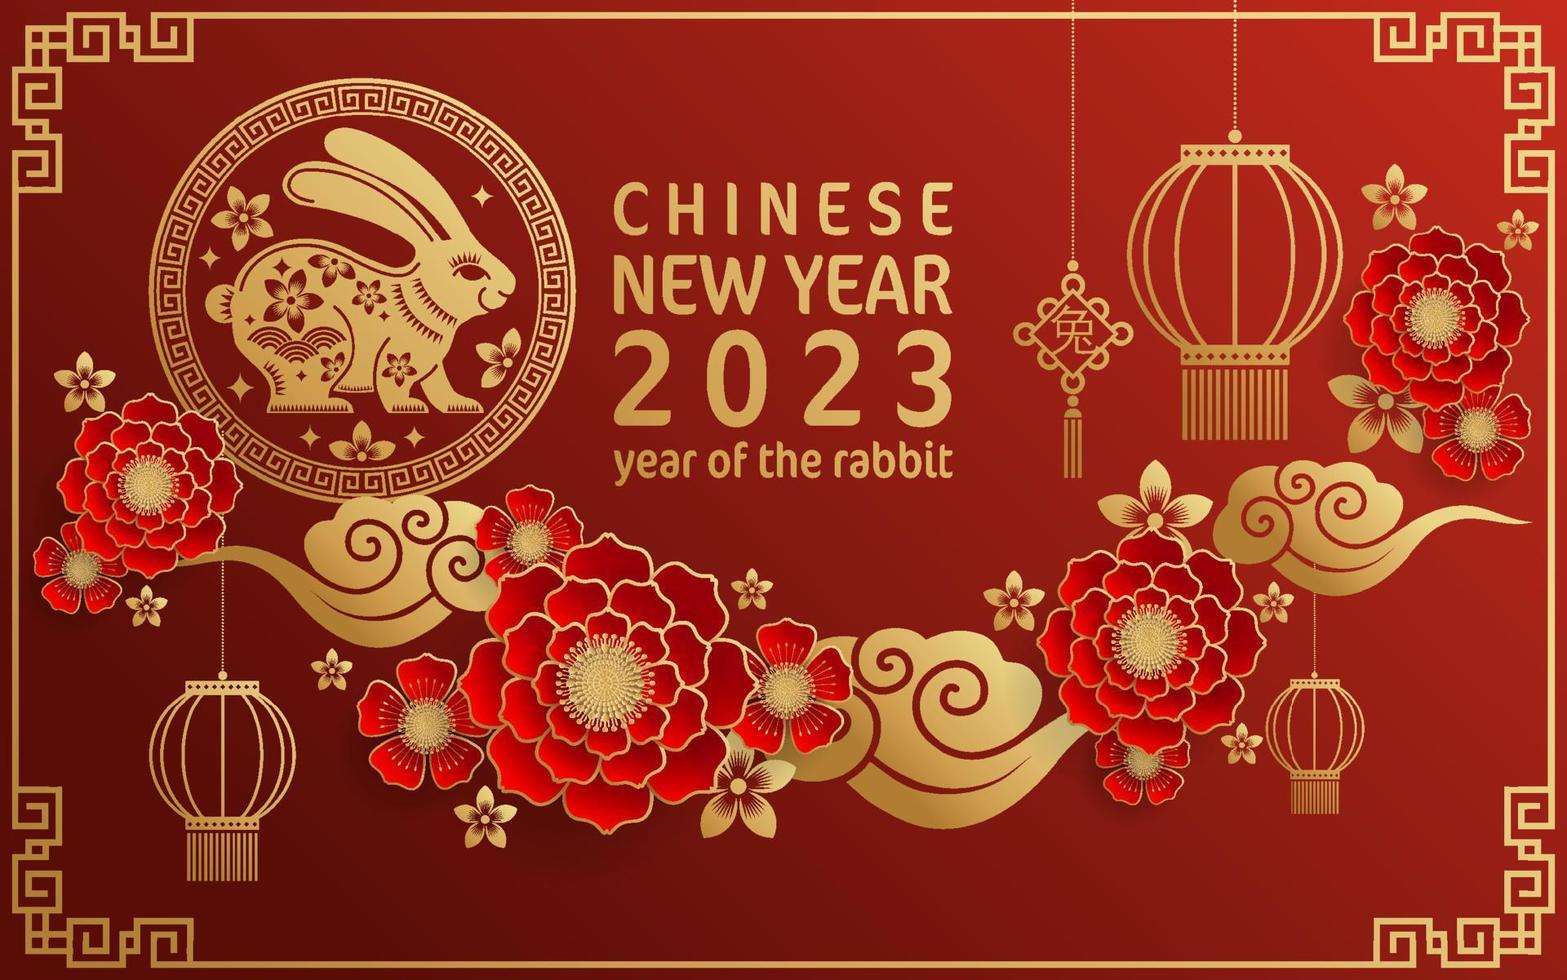 Lunar New Year Background Images  Free Photos PNG Stickers Wallpapers   Backgrounds  rawpixel